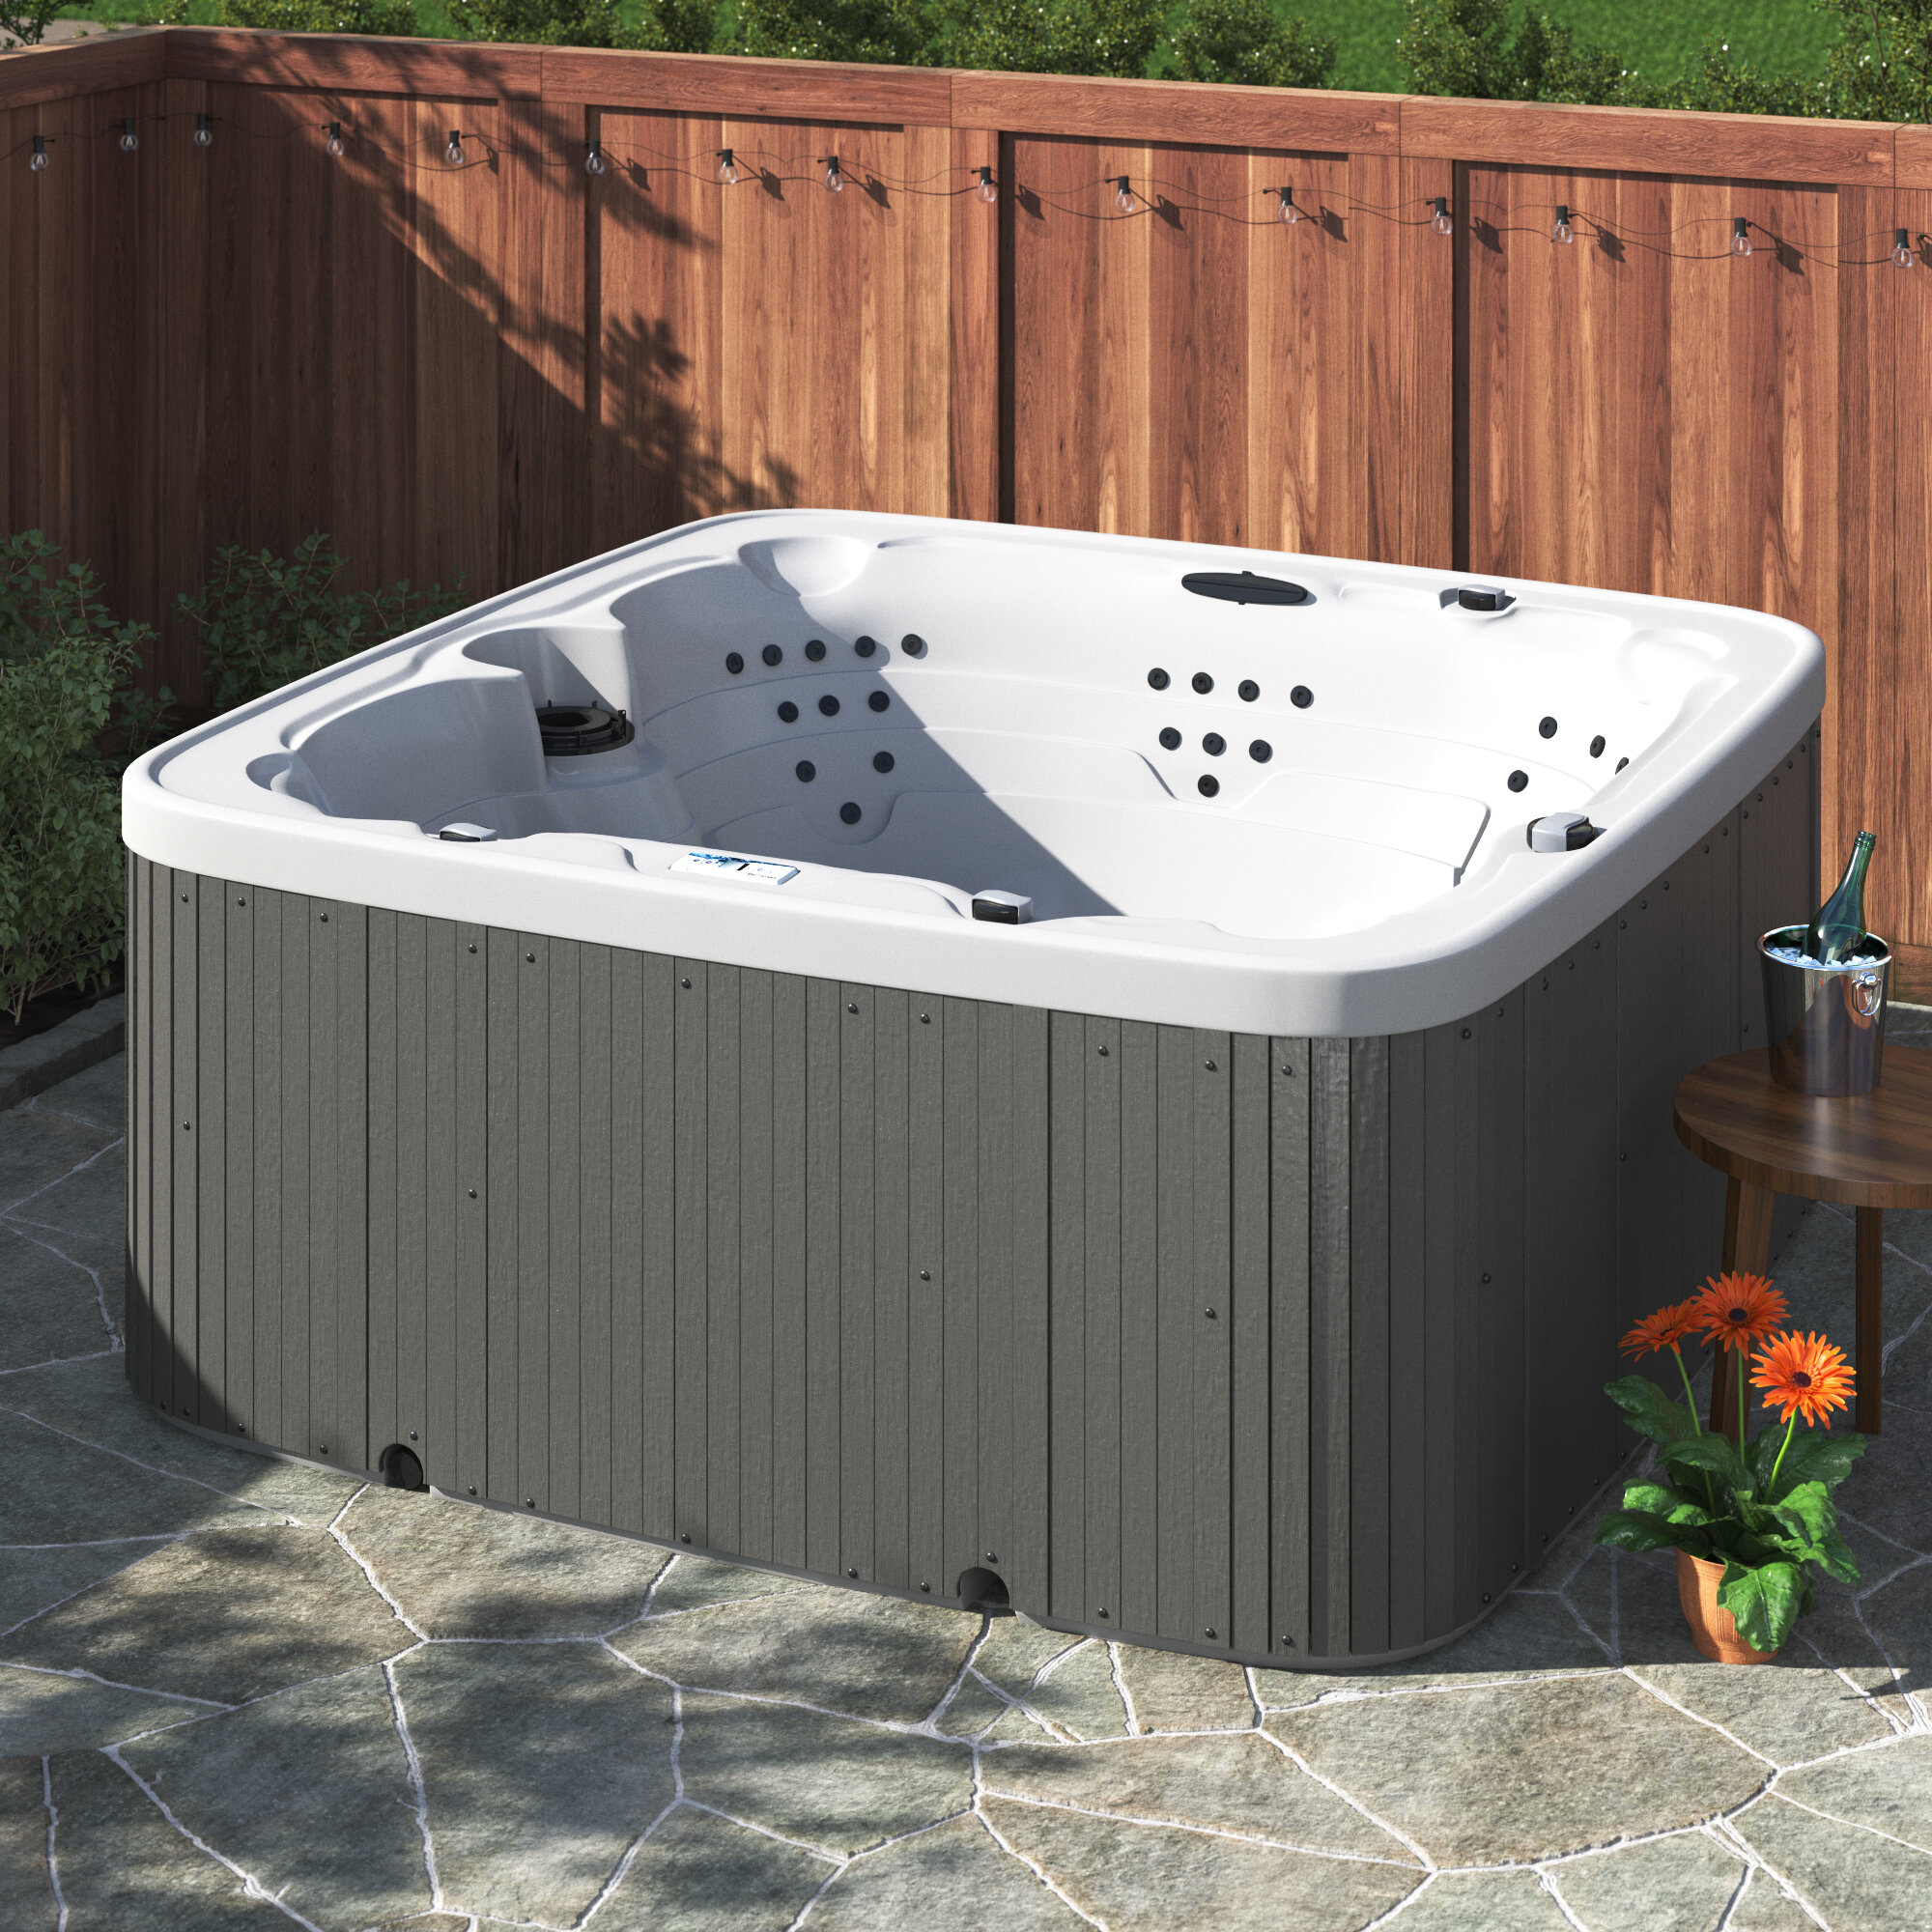 The Most Affordable and Reliable Hot Tub Lifesmart plug and play